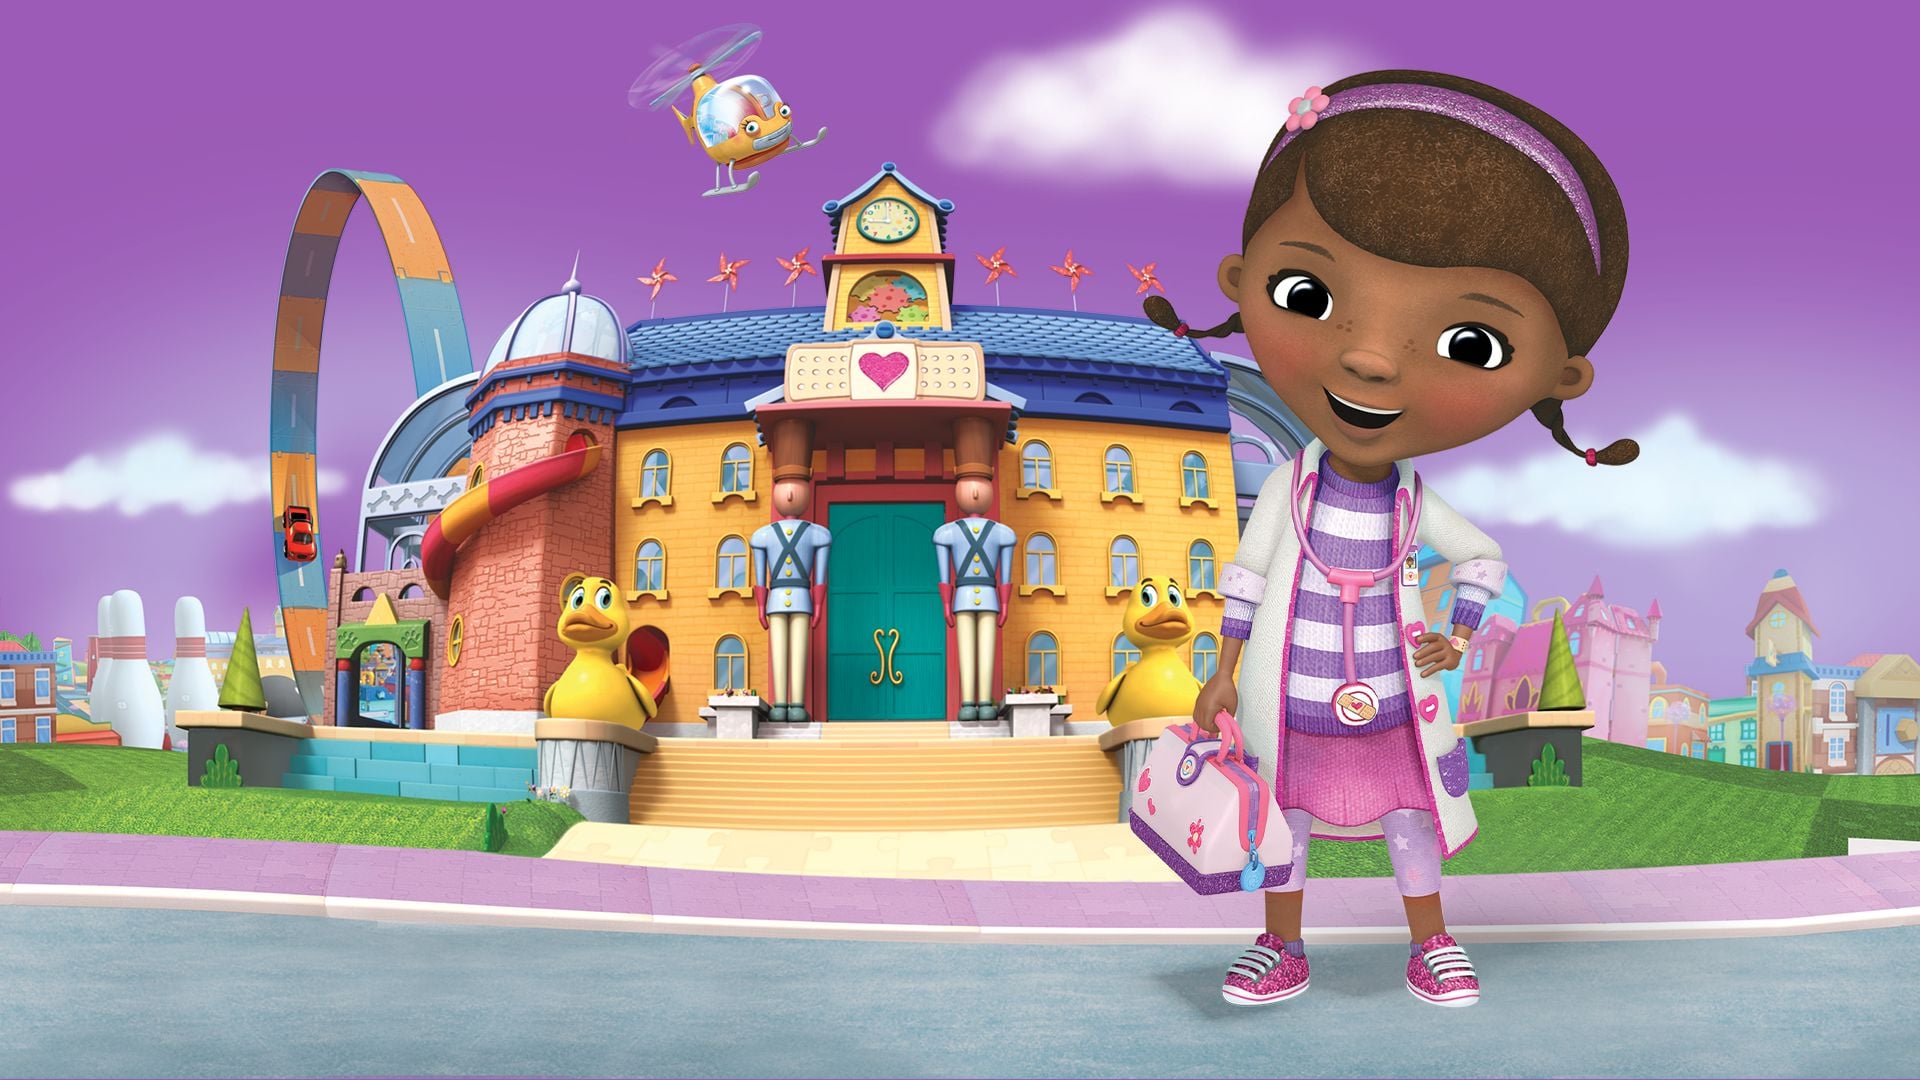 Doc McStuffins - Where to Watch and Stream - TV Guide